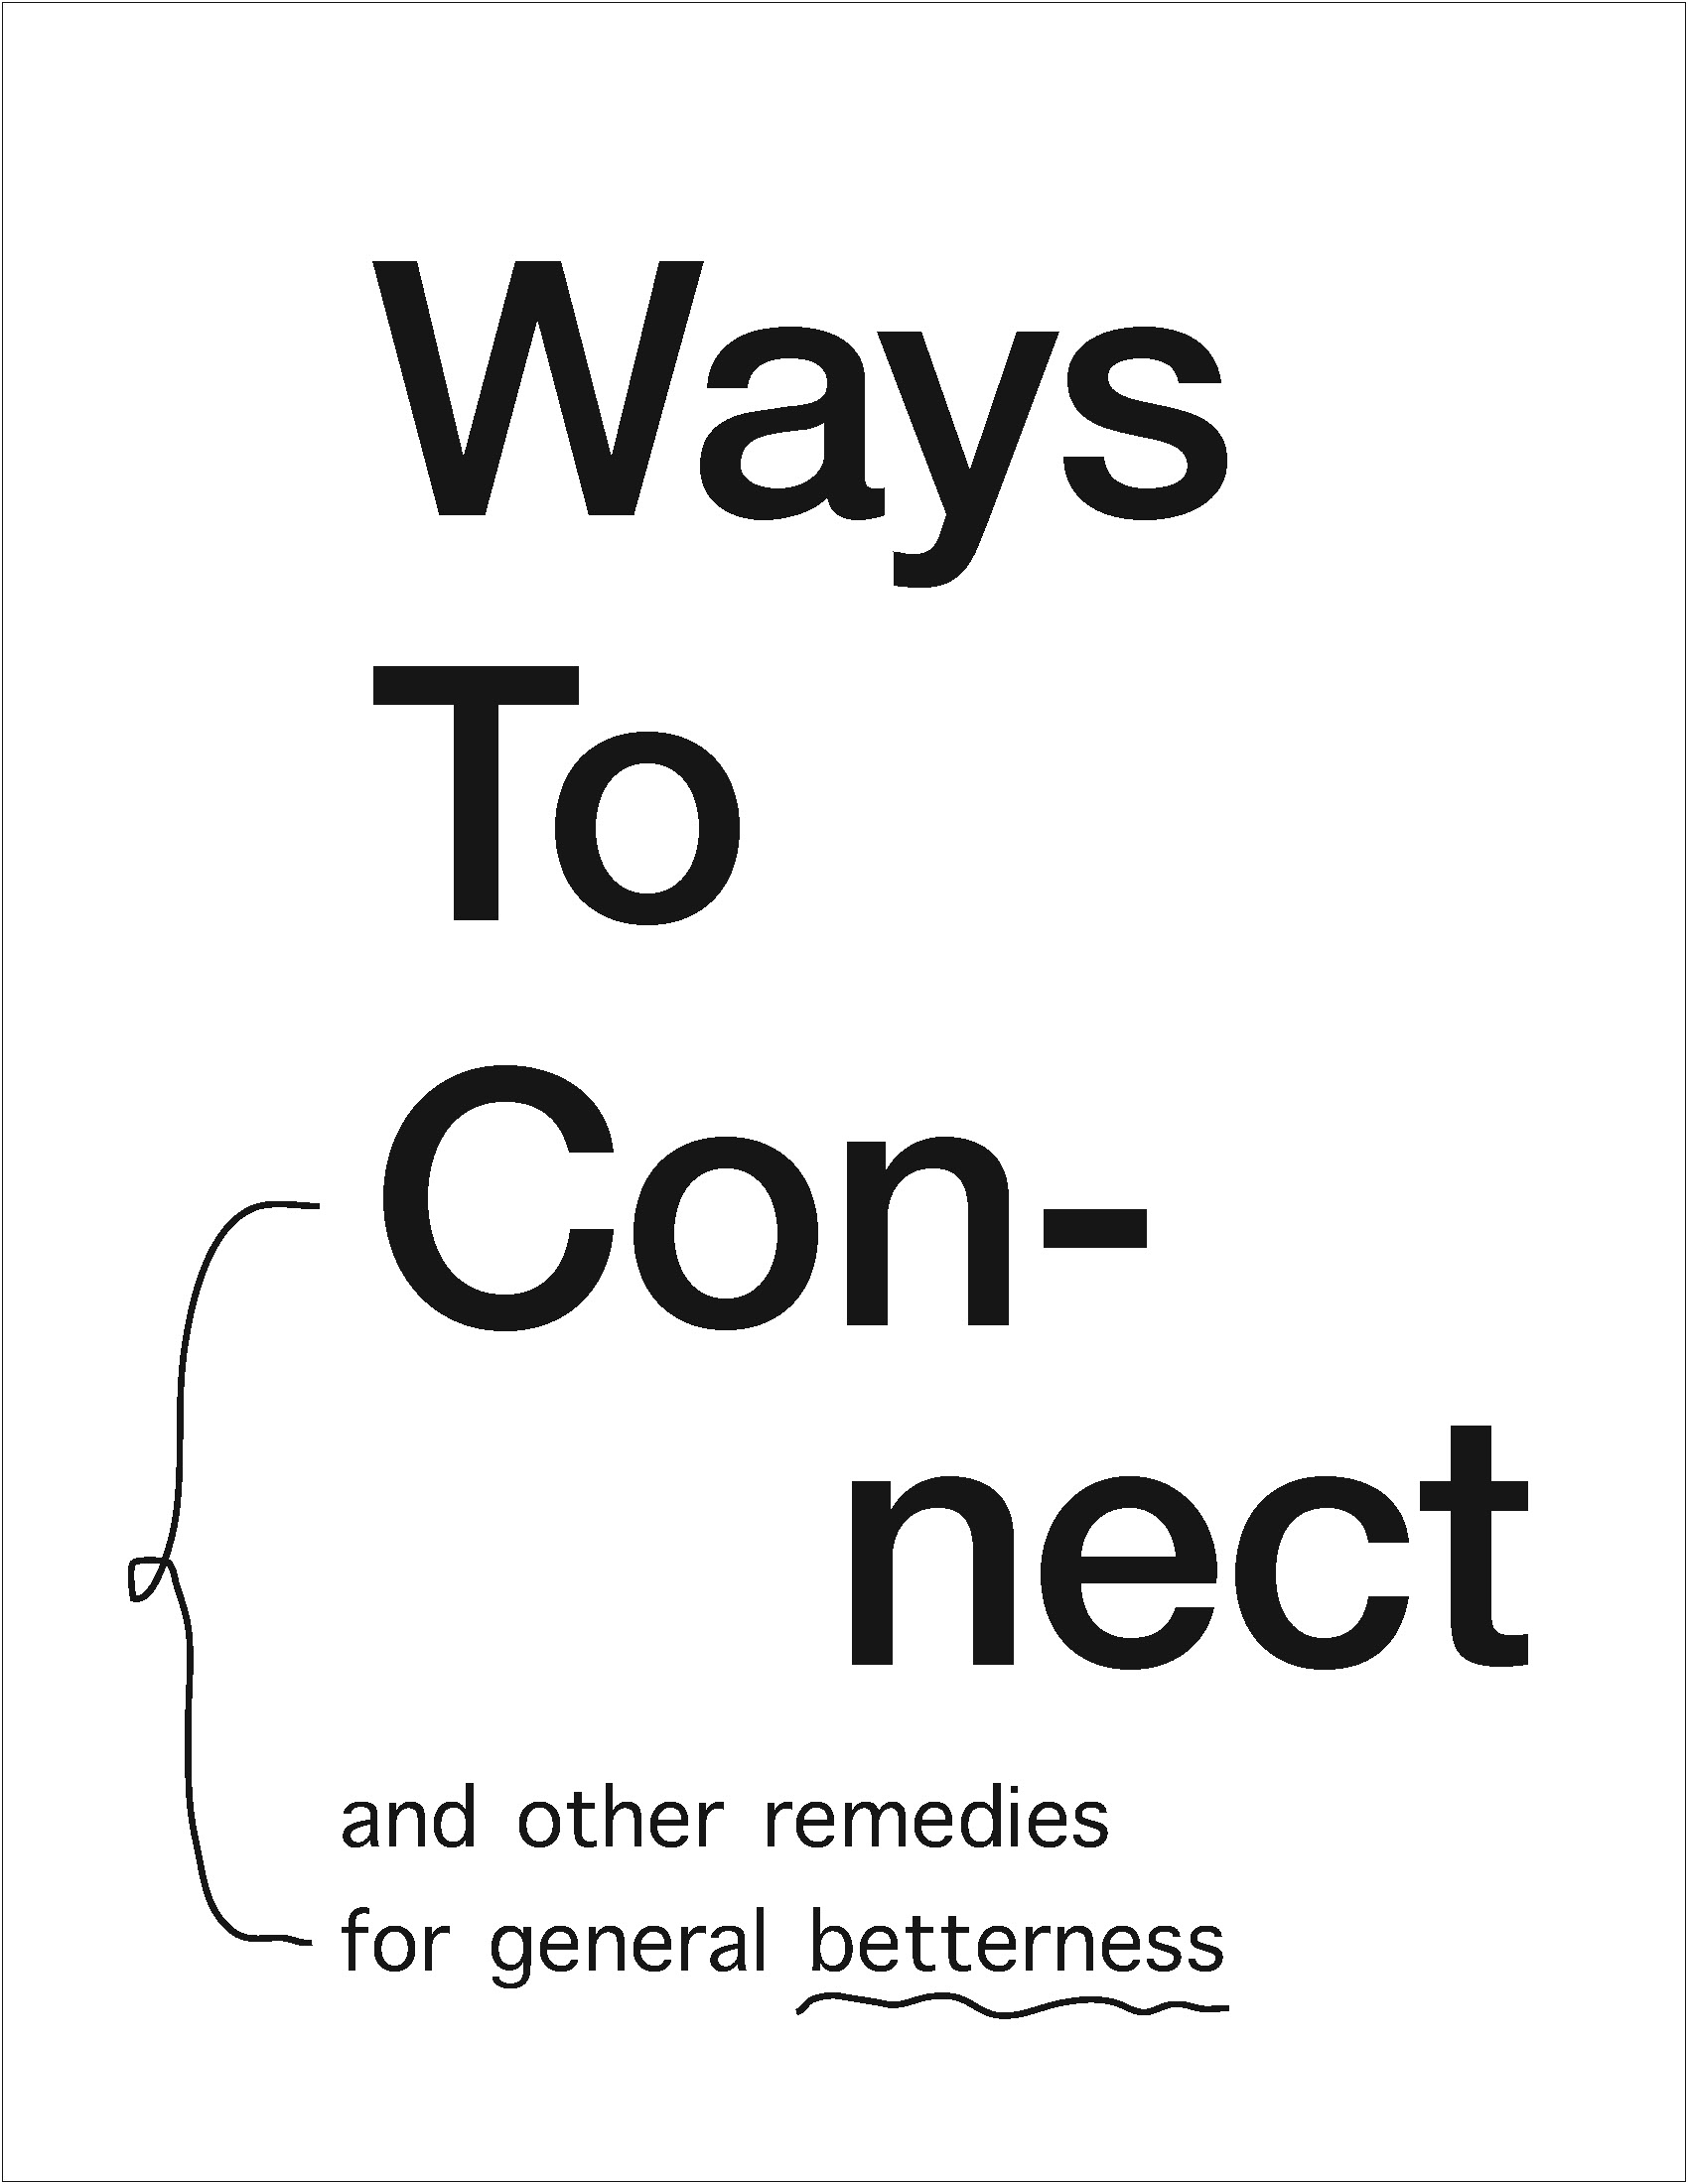 Ways to Connect and other remedies  for general betterness